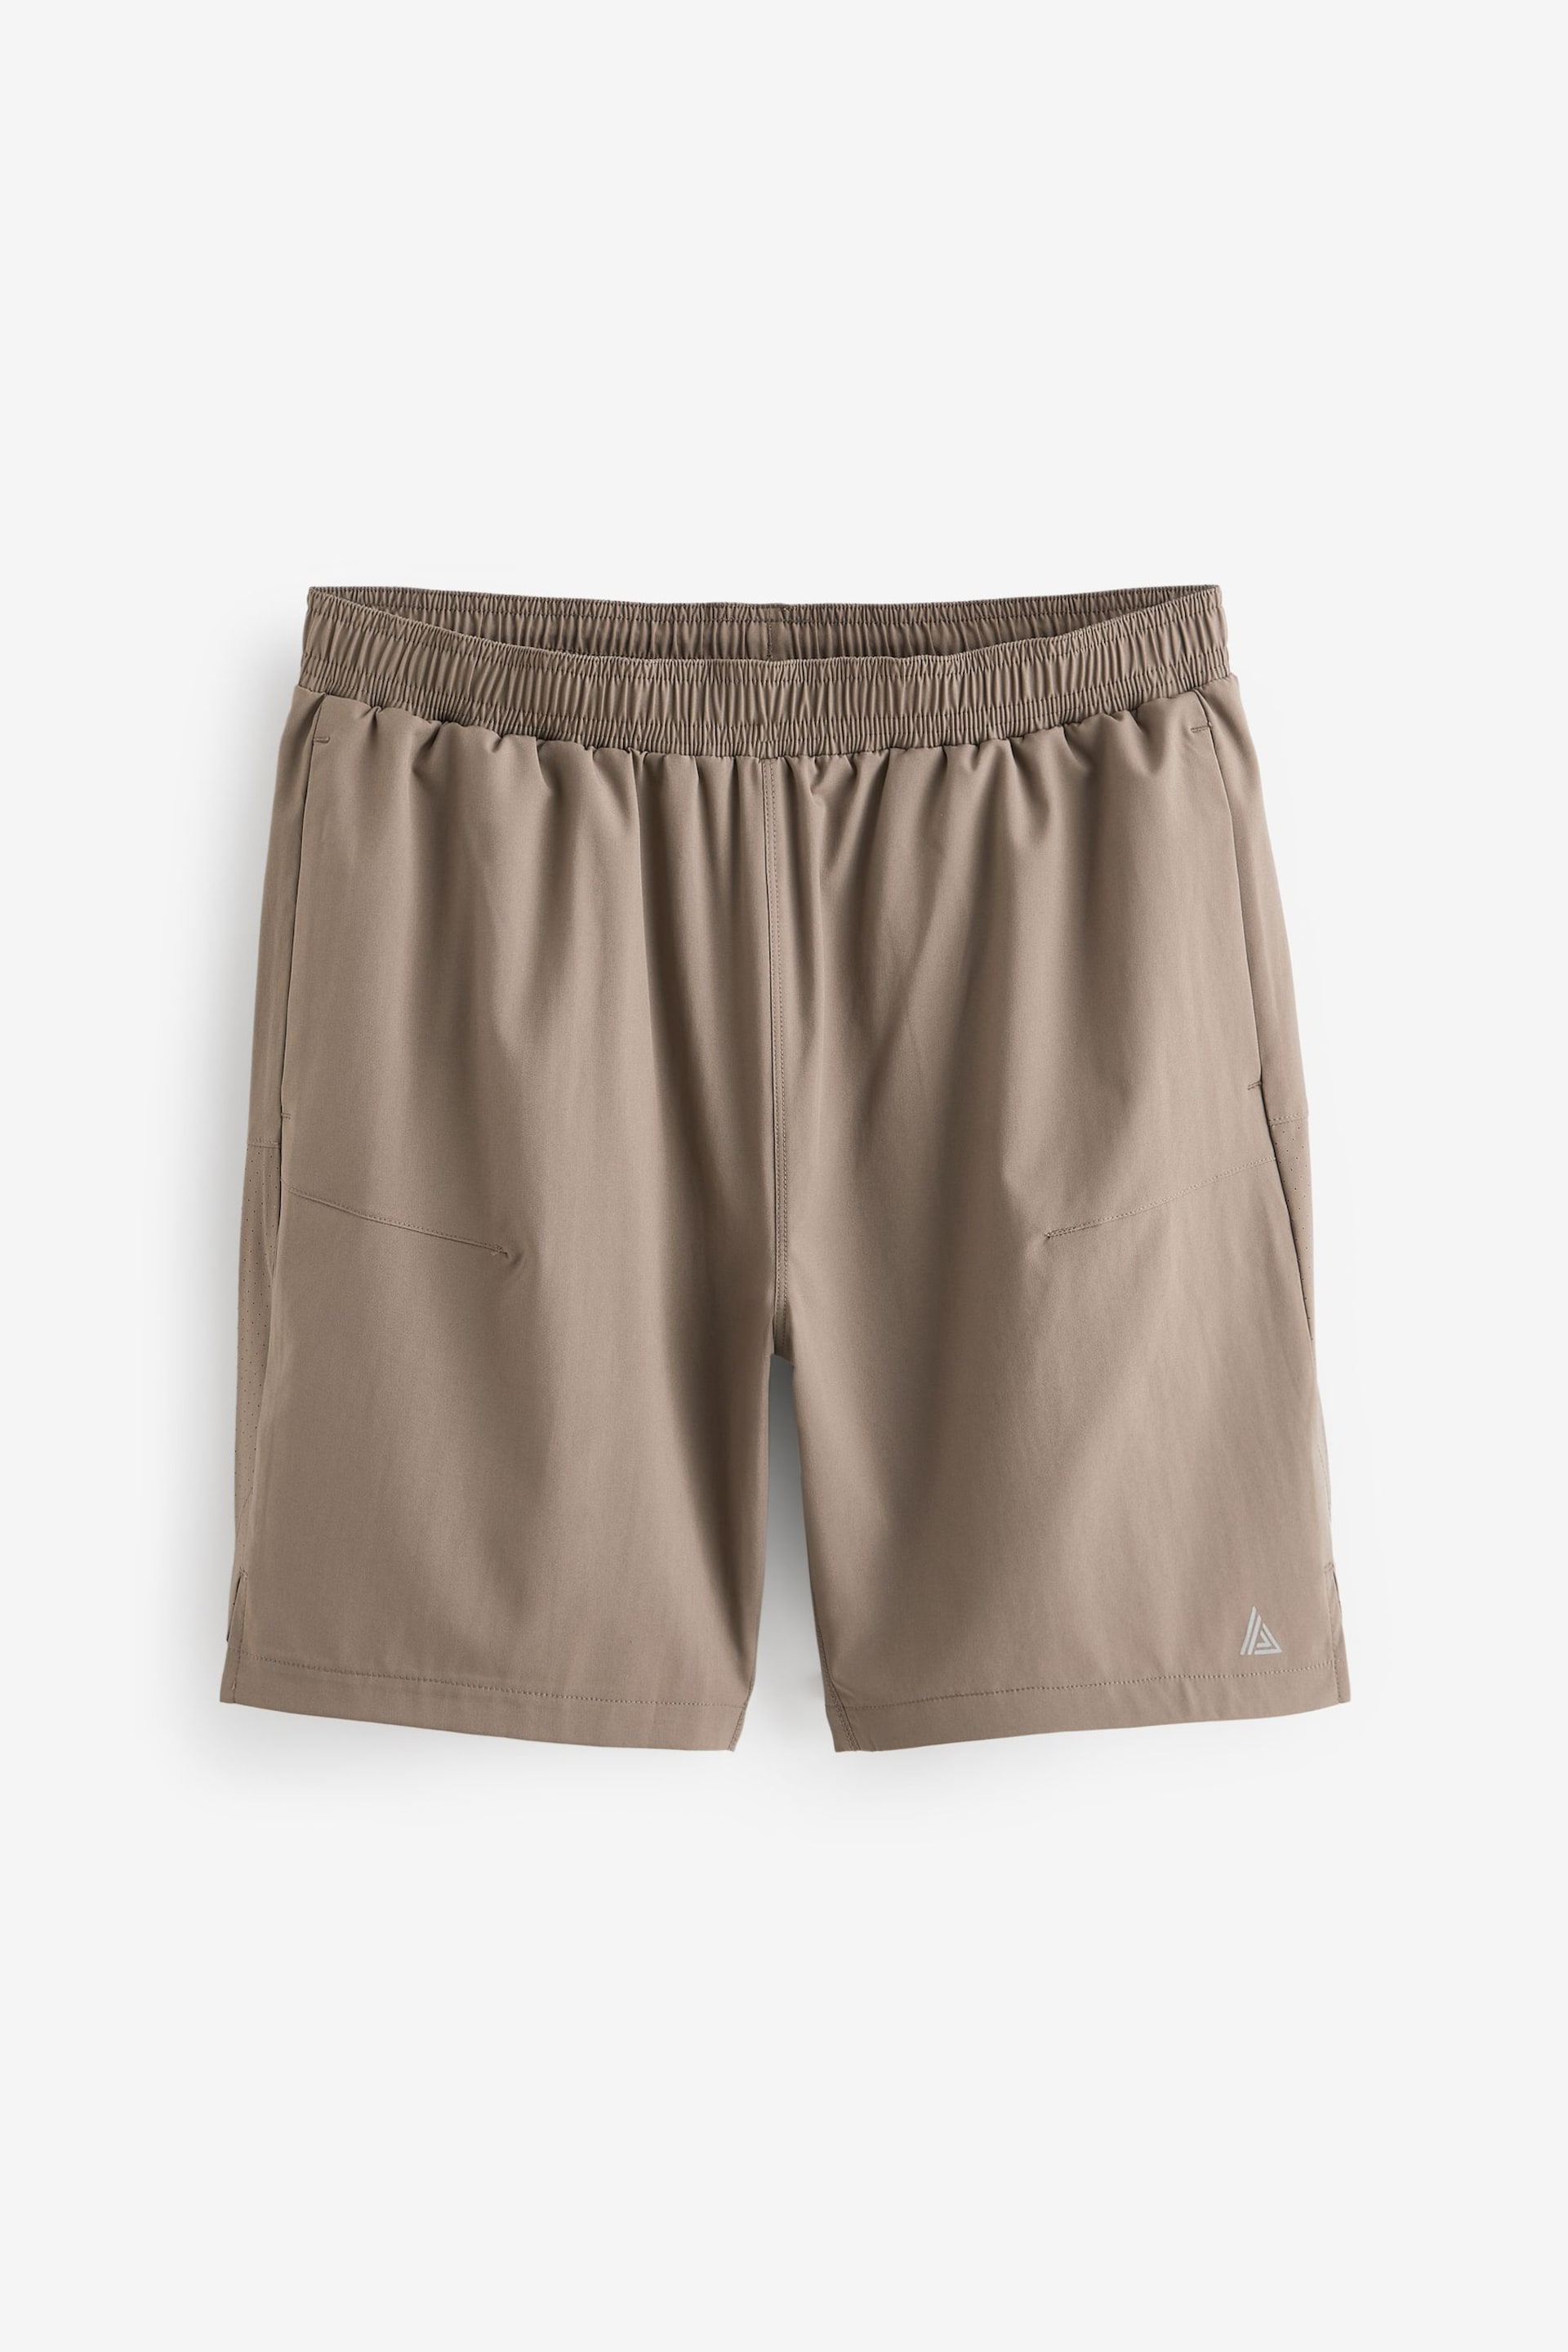 Neutral 7 Inch Active Gym Sports Shorts - Image 8 of 10